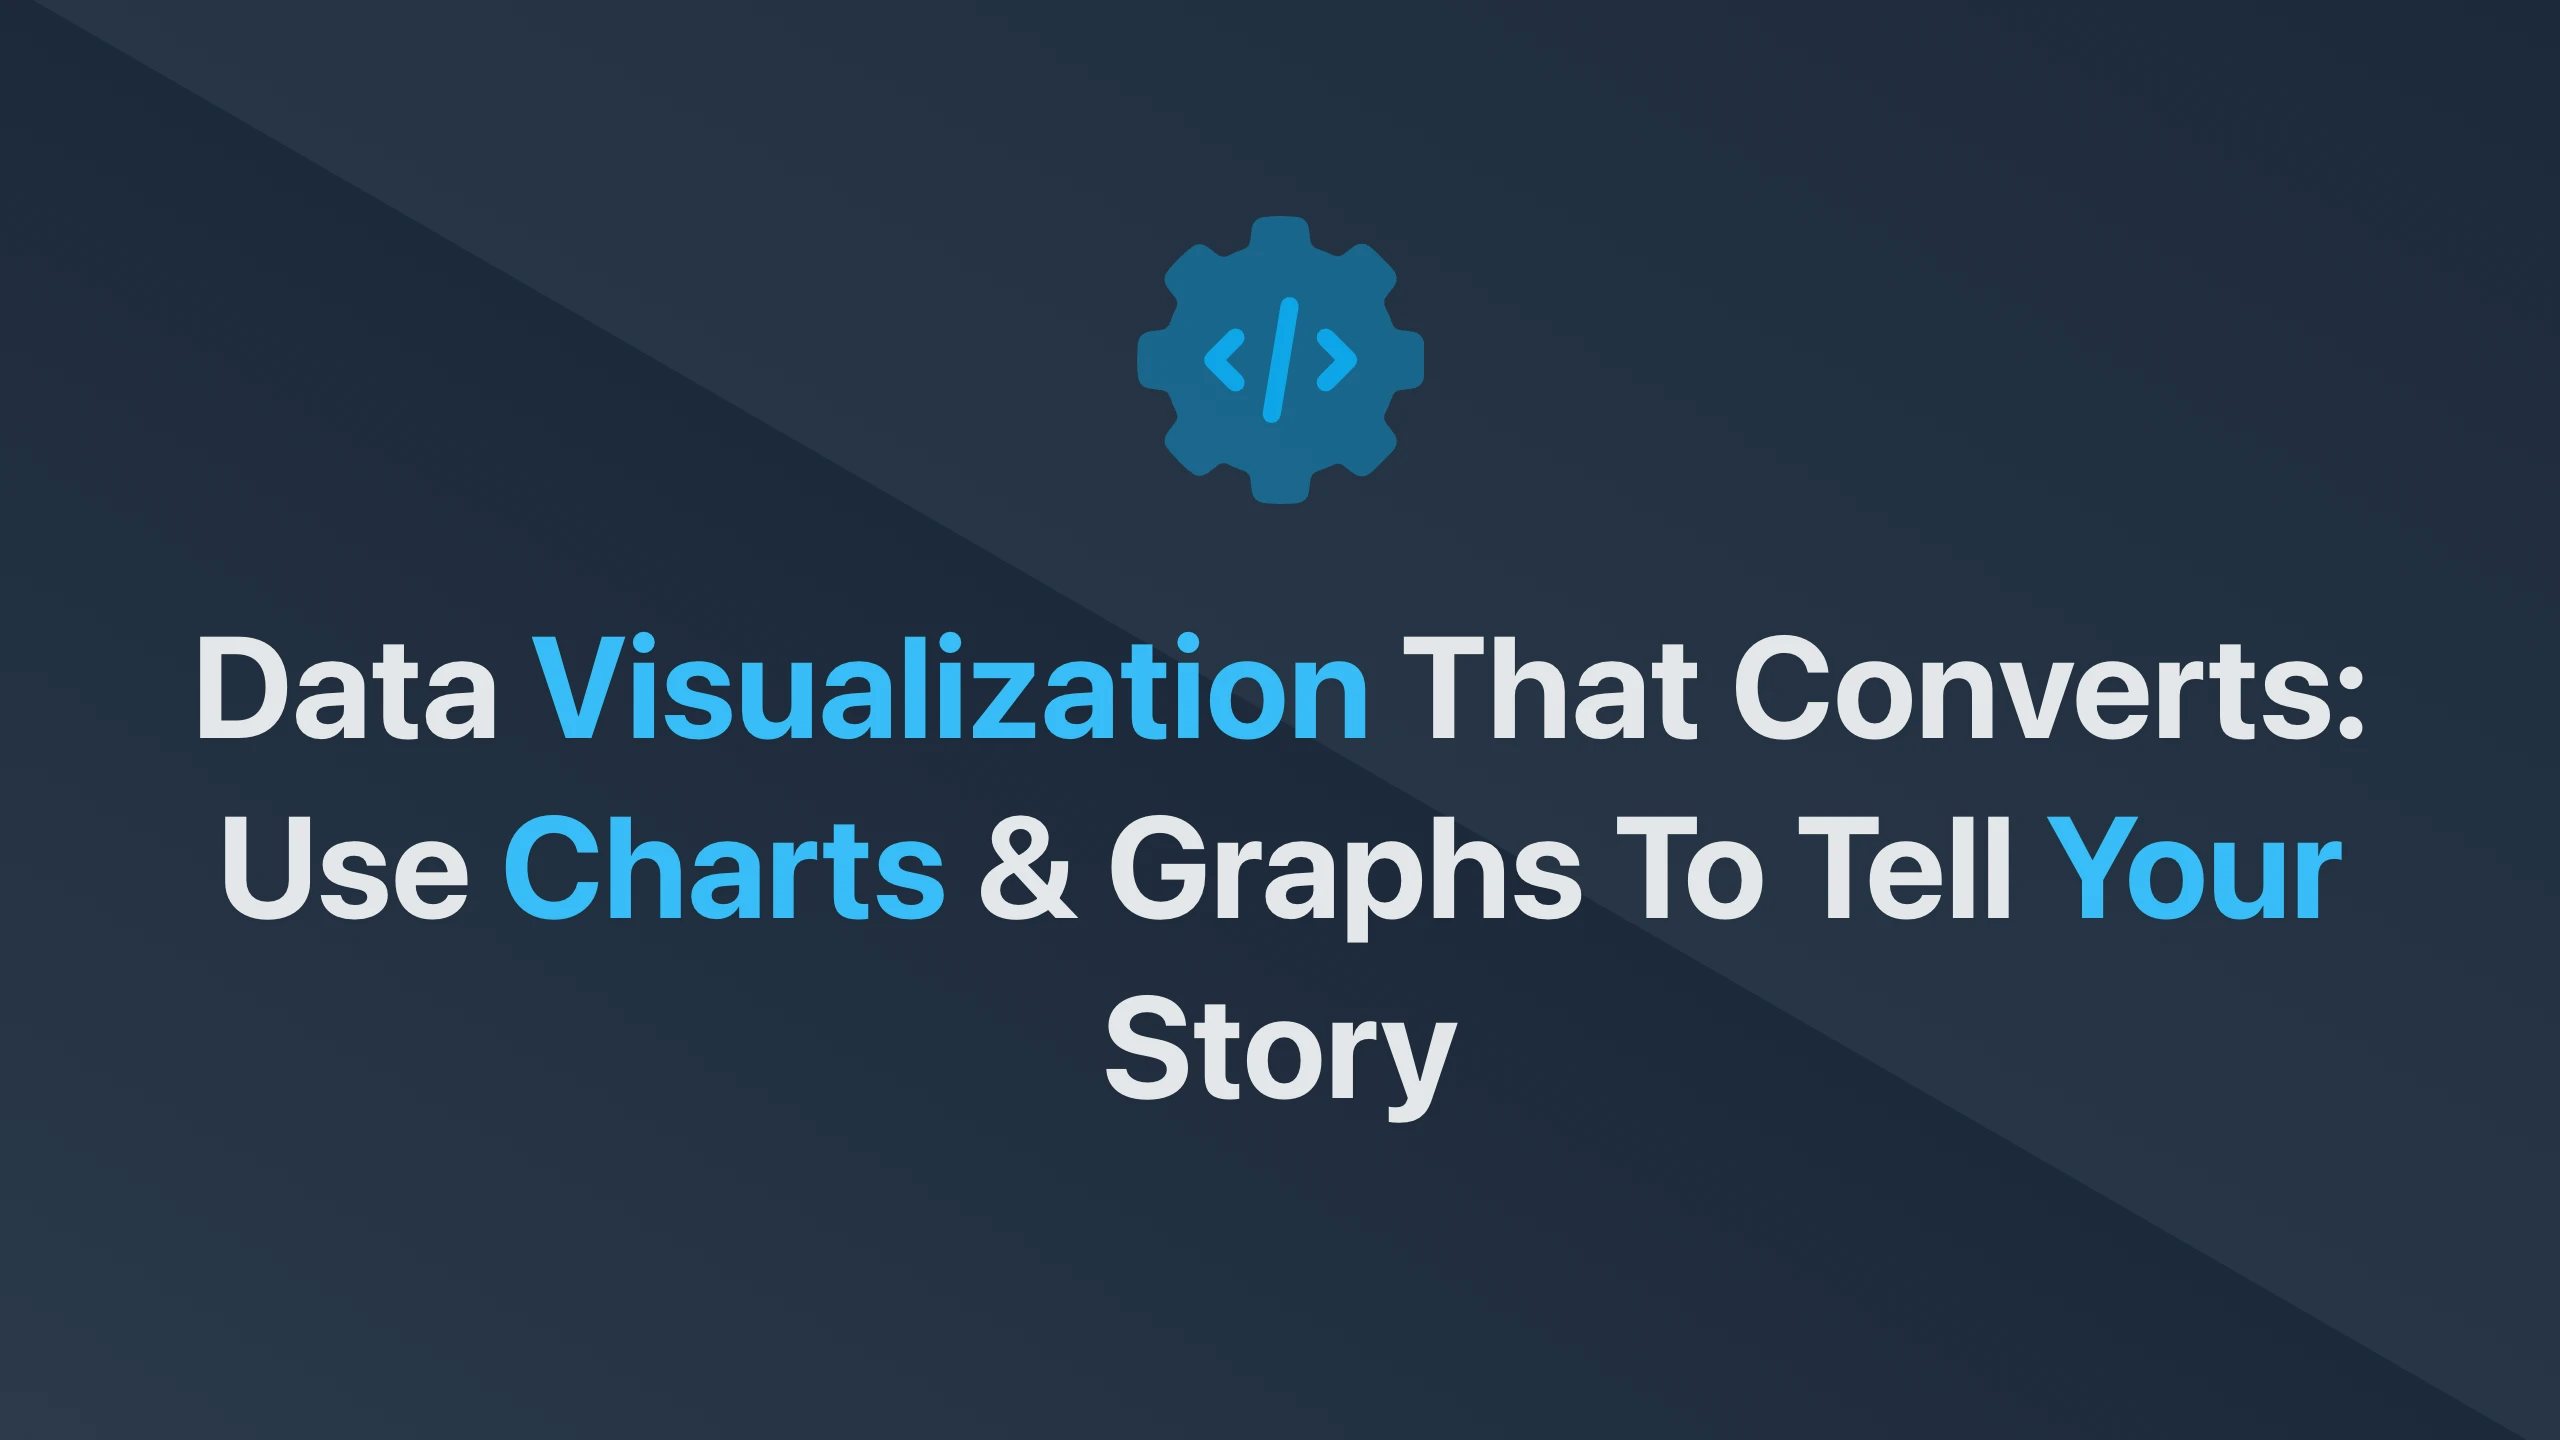 Cover Image for Data Visualization that Converts: Use Charts & Graphs to Tell Your Story